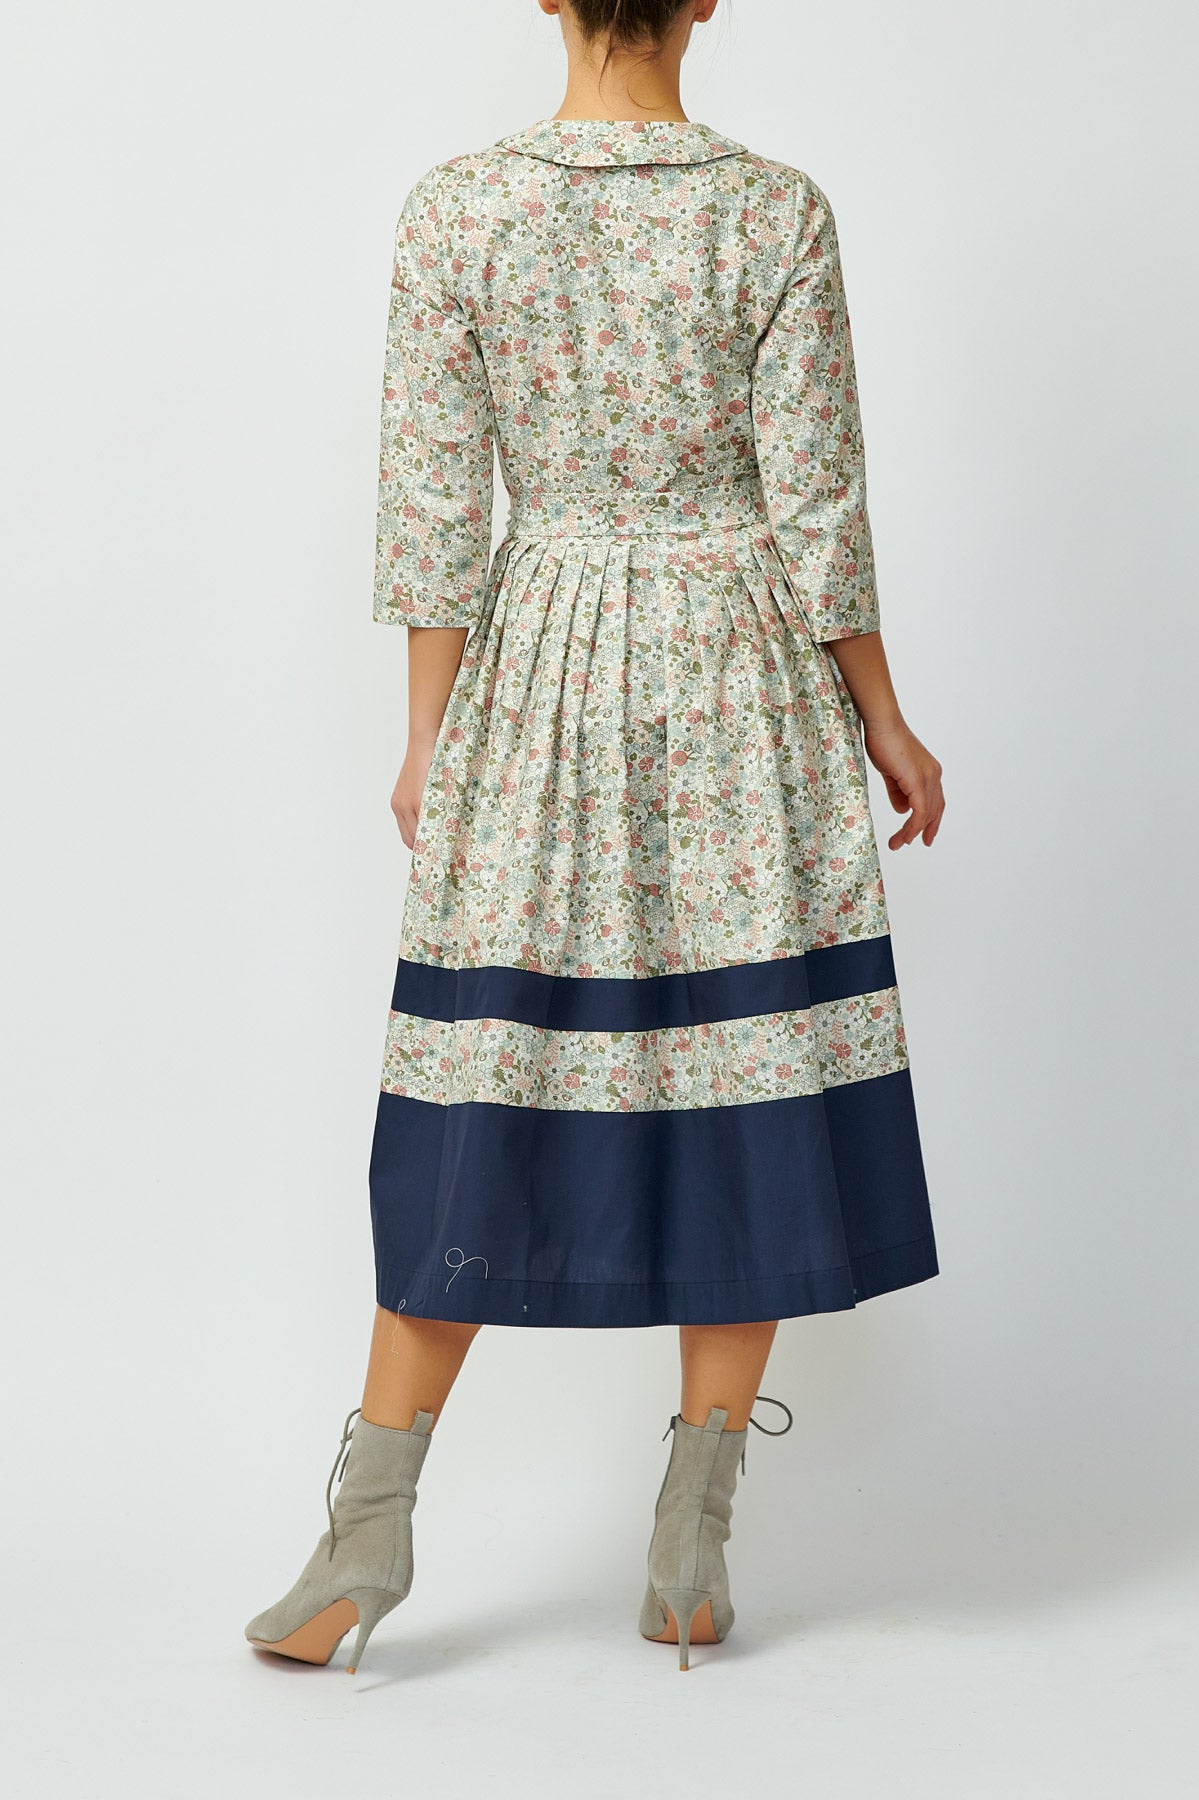 Shirt dress in small flowers and with a gray border